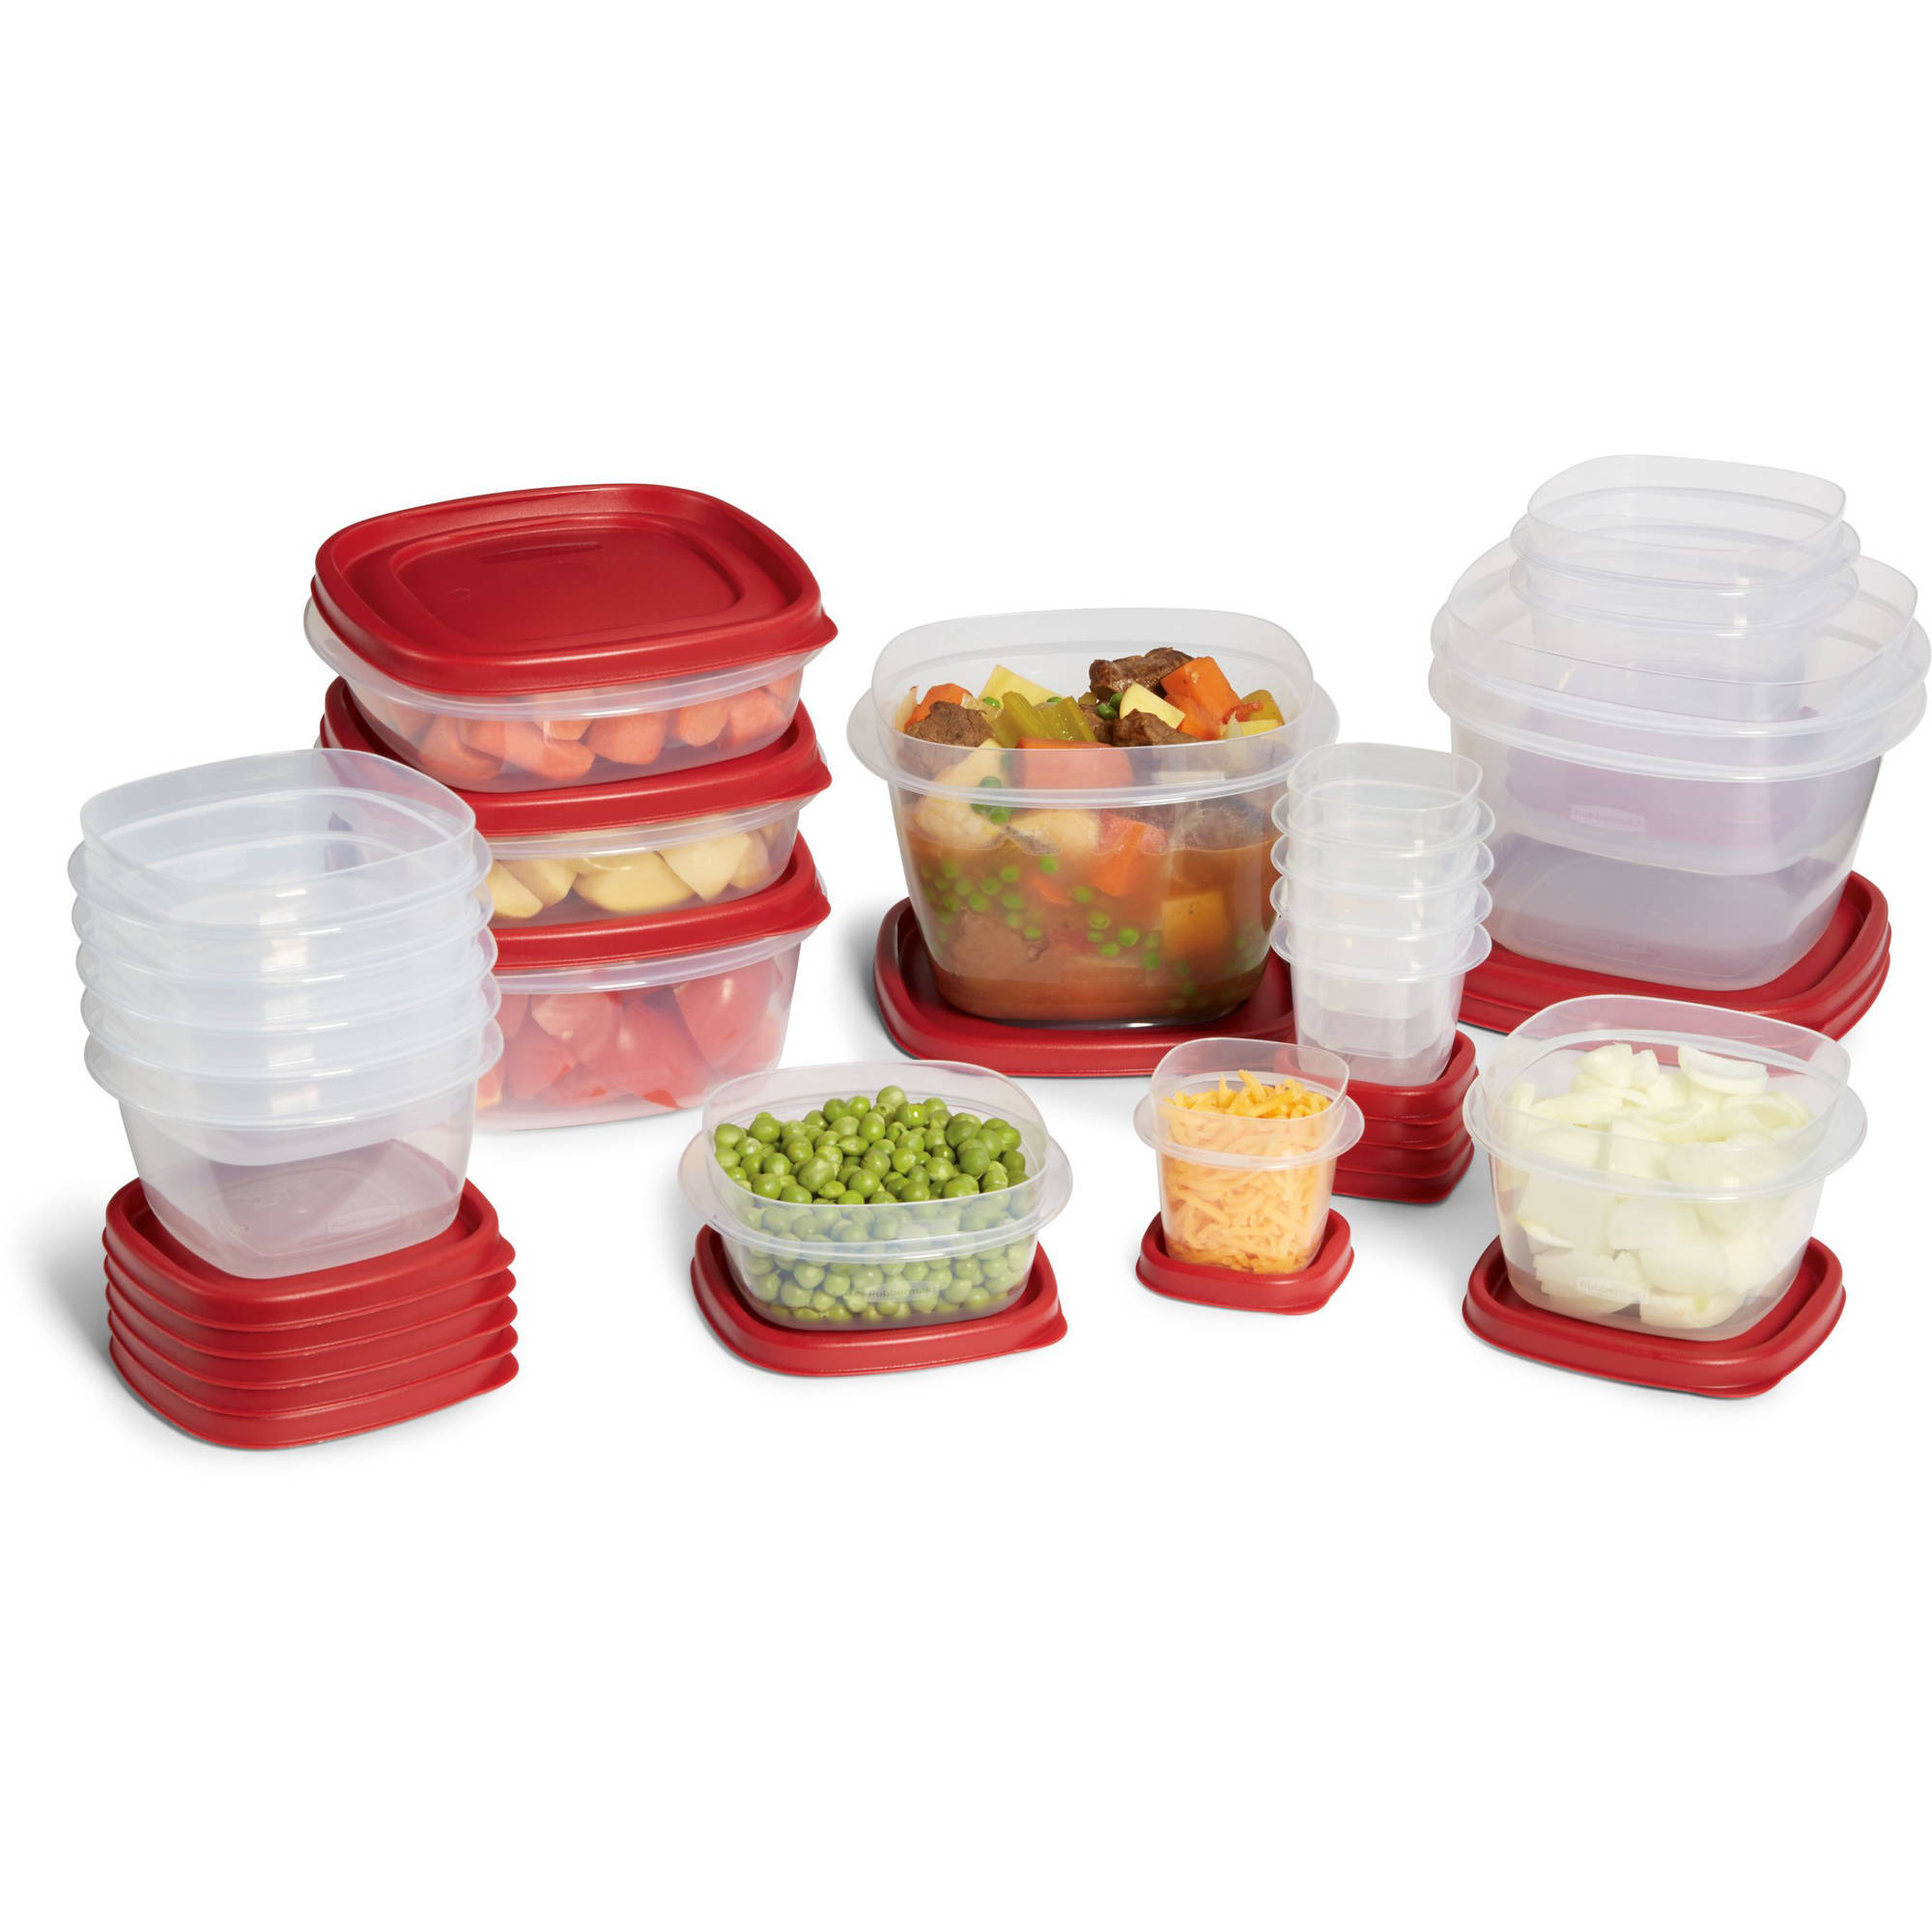 Rubbermaid Easy Find Lids Food Storage and Organization Containers, Set of 20 (40 Pieces Total) - image 3 of 13